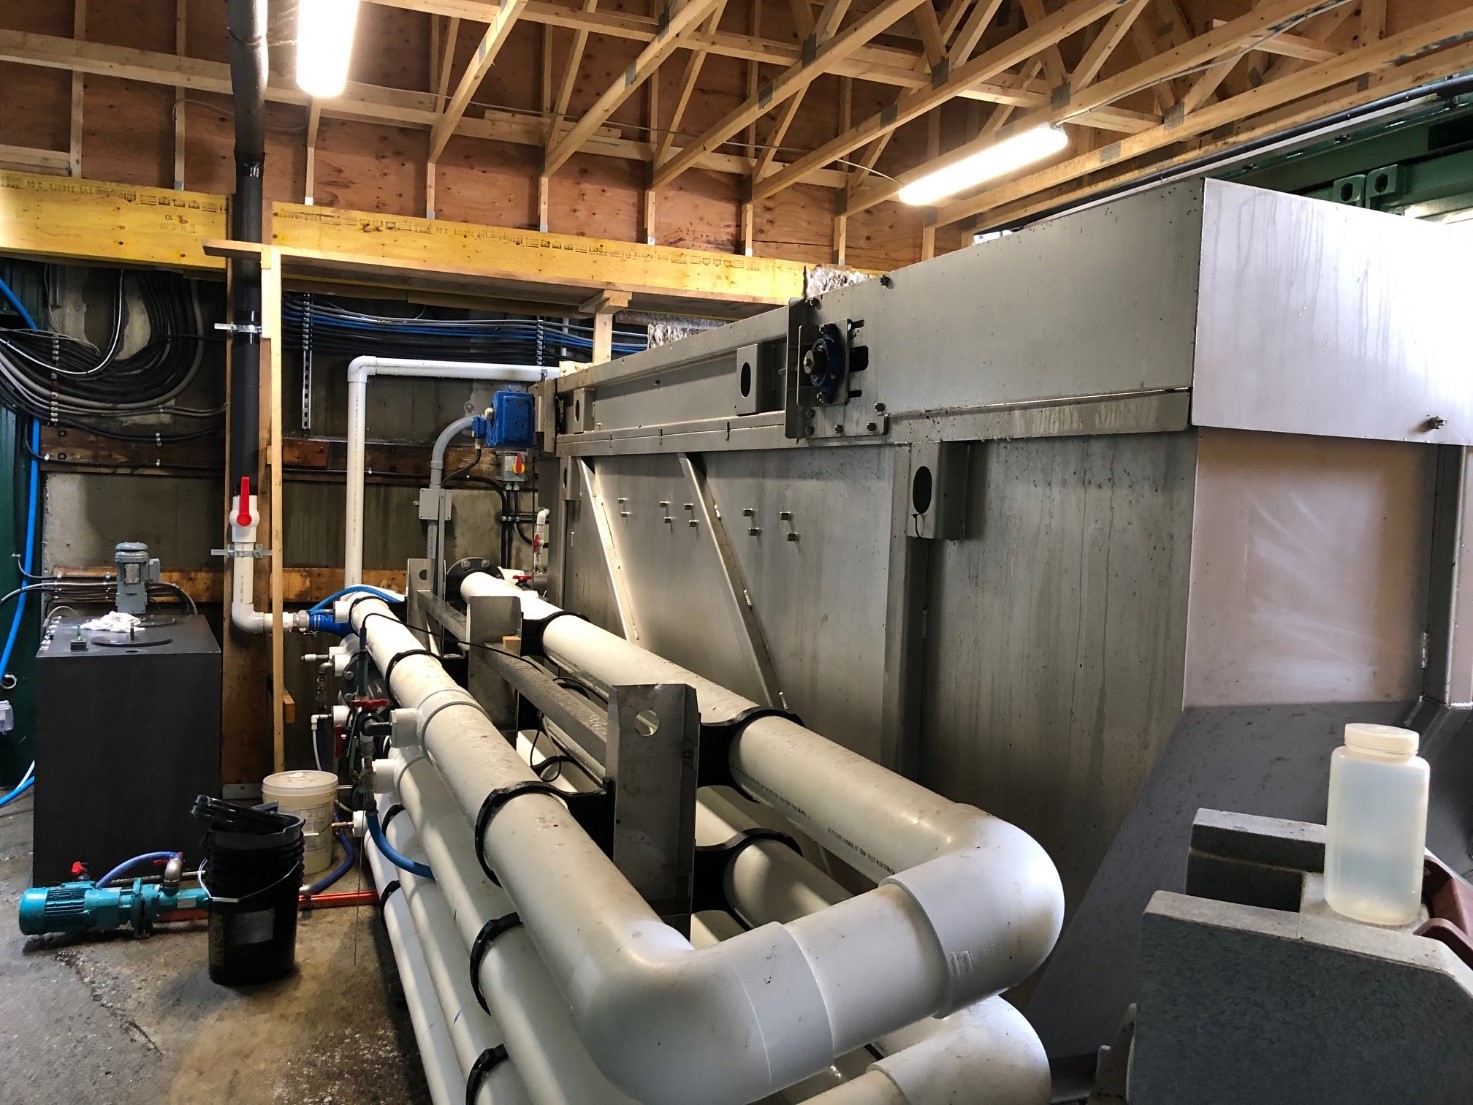 Installation of an advanced oxidation process to remove color and solids from wastewater and the clear effluent discharge